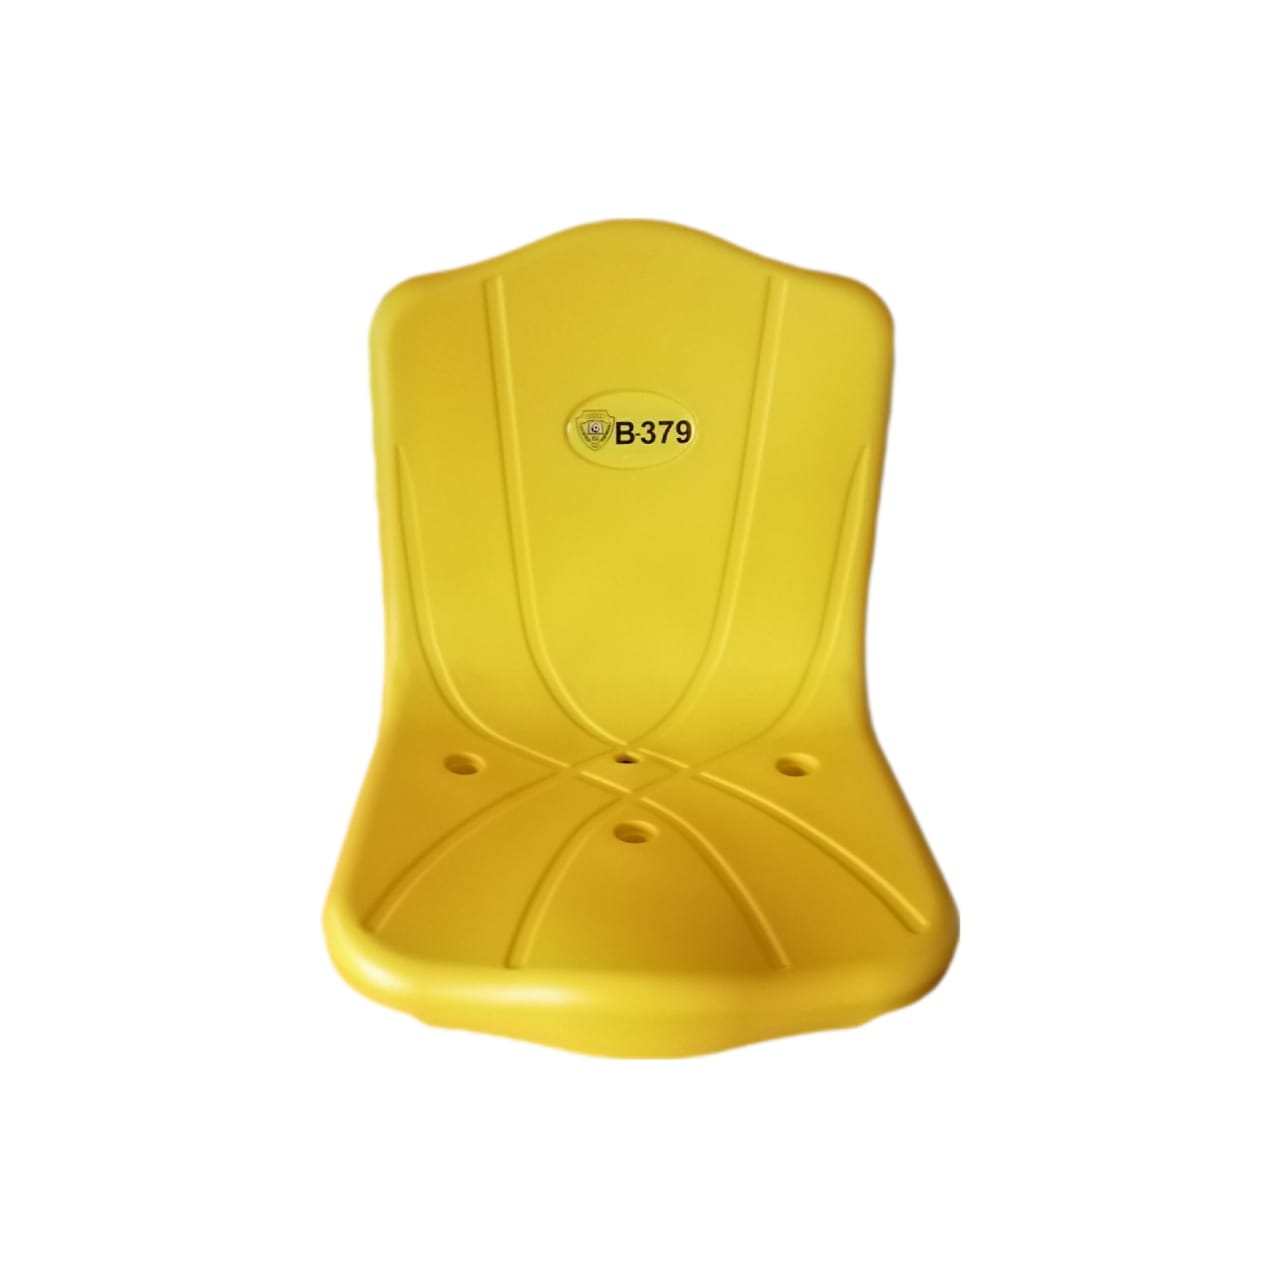 Stadium seat Mix of High comfort and Modern Design and Durability Di